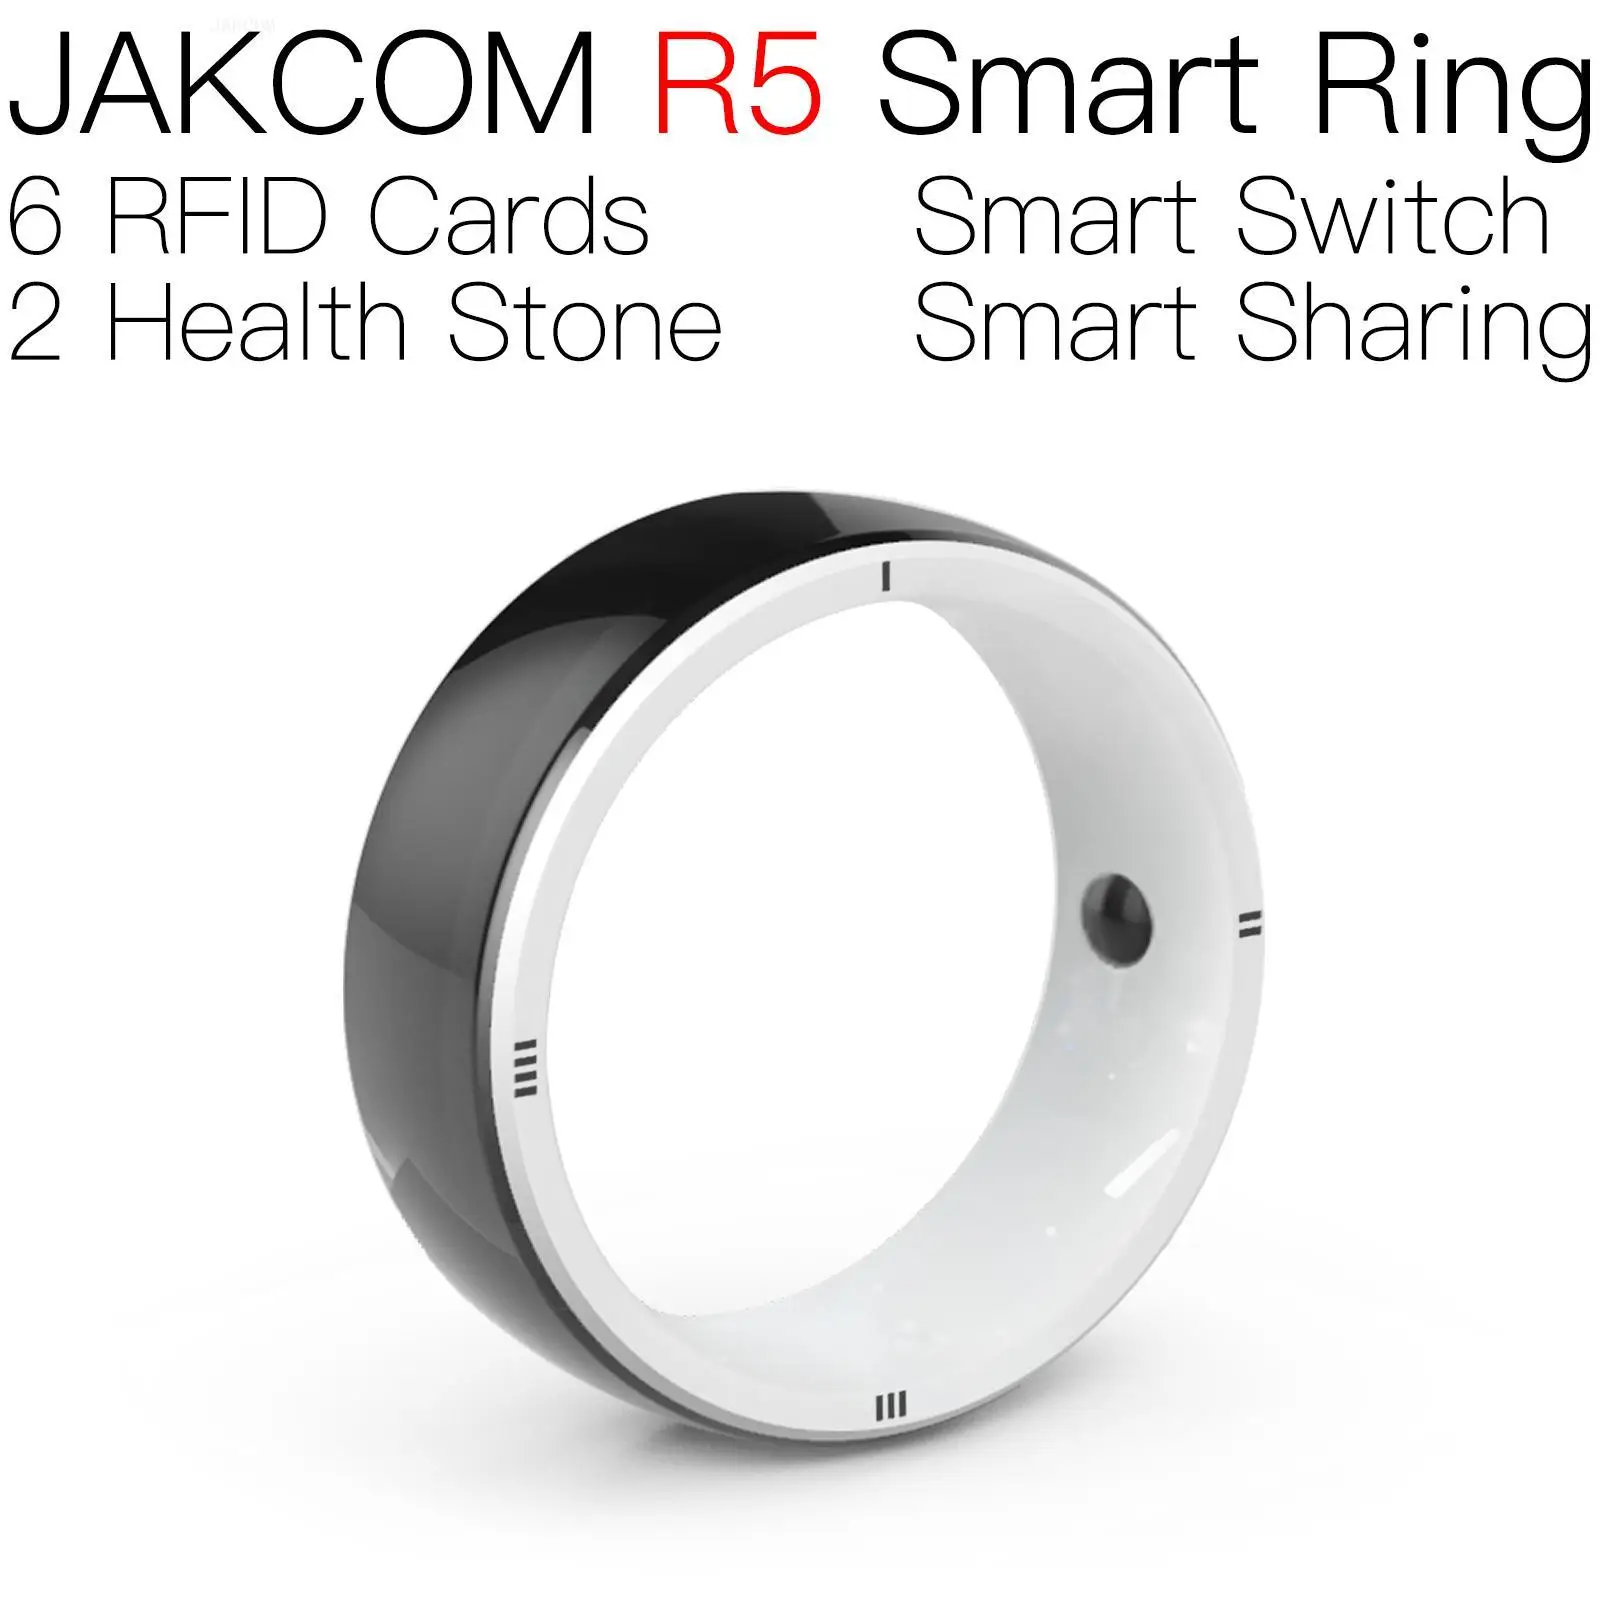 

JAKCOM R5 Smart Ring better than a nail watch nfc rewriteable rfid microchip reader adhesive ntag215 sticker micro chip 125khz